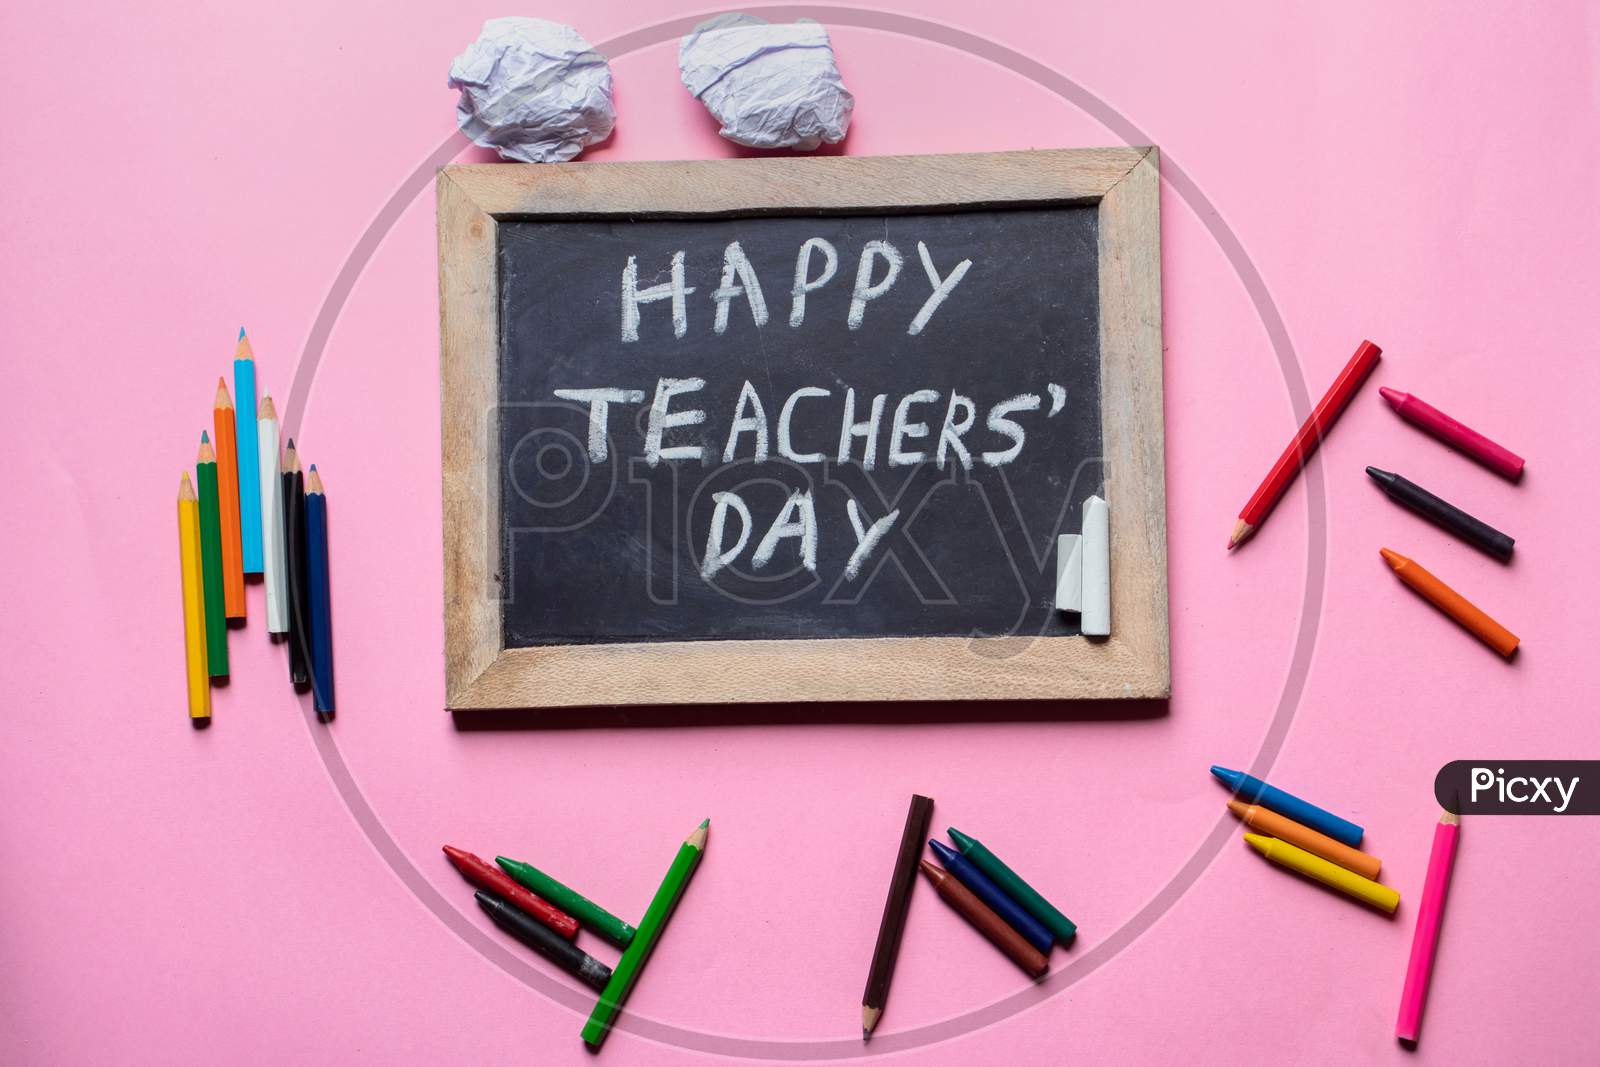 Happy Teacher's Day Creative Photo With Chalkboard And Pencils Isolated On Pink Background, Perfect For Wallpaper